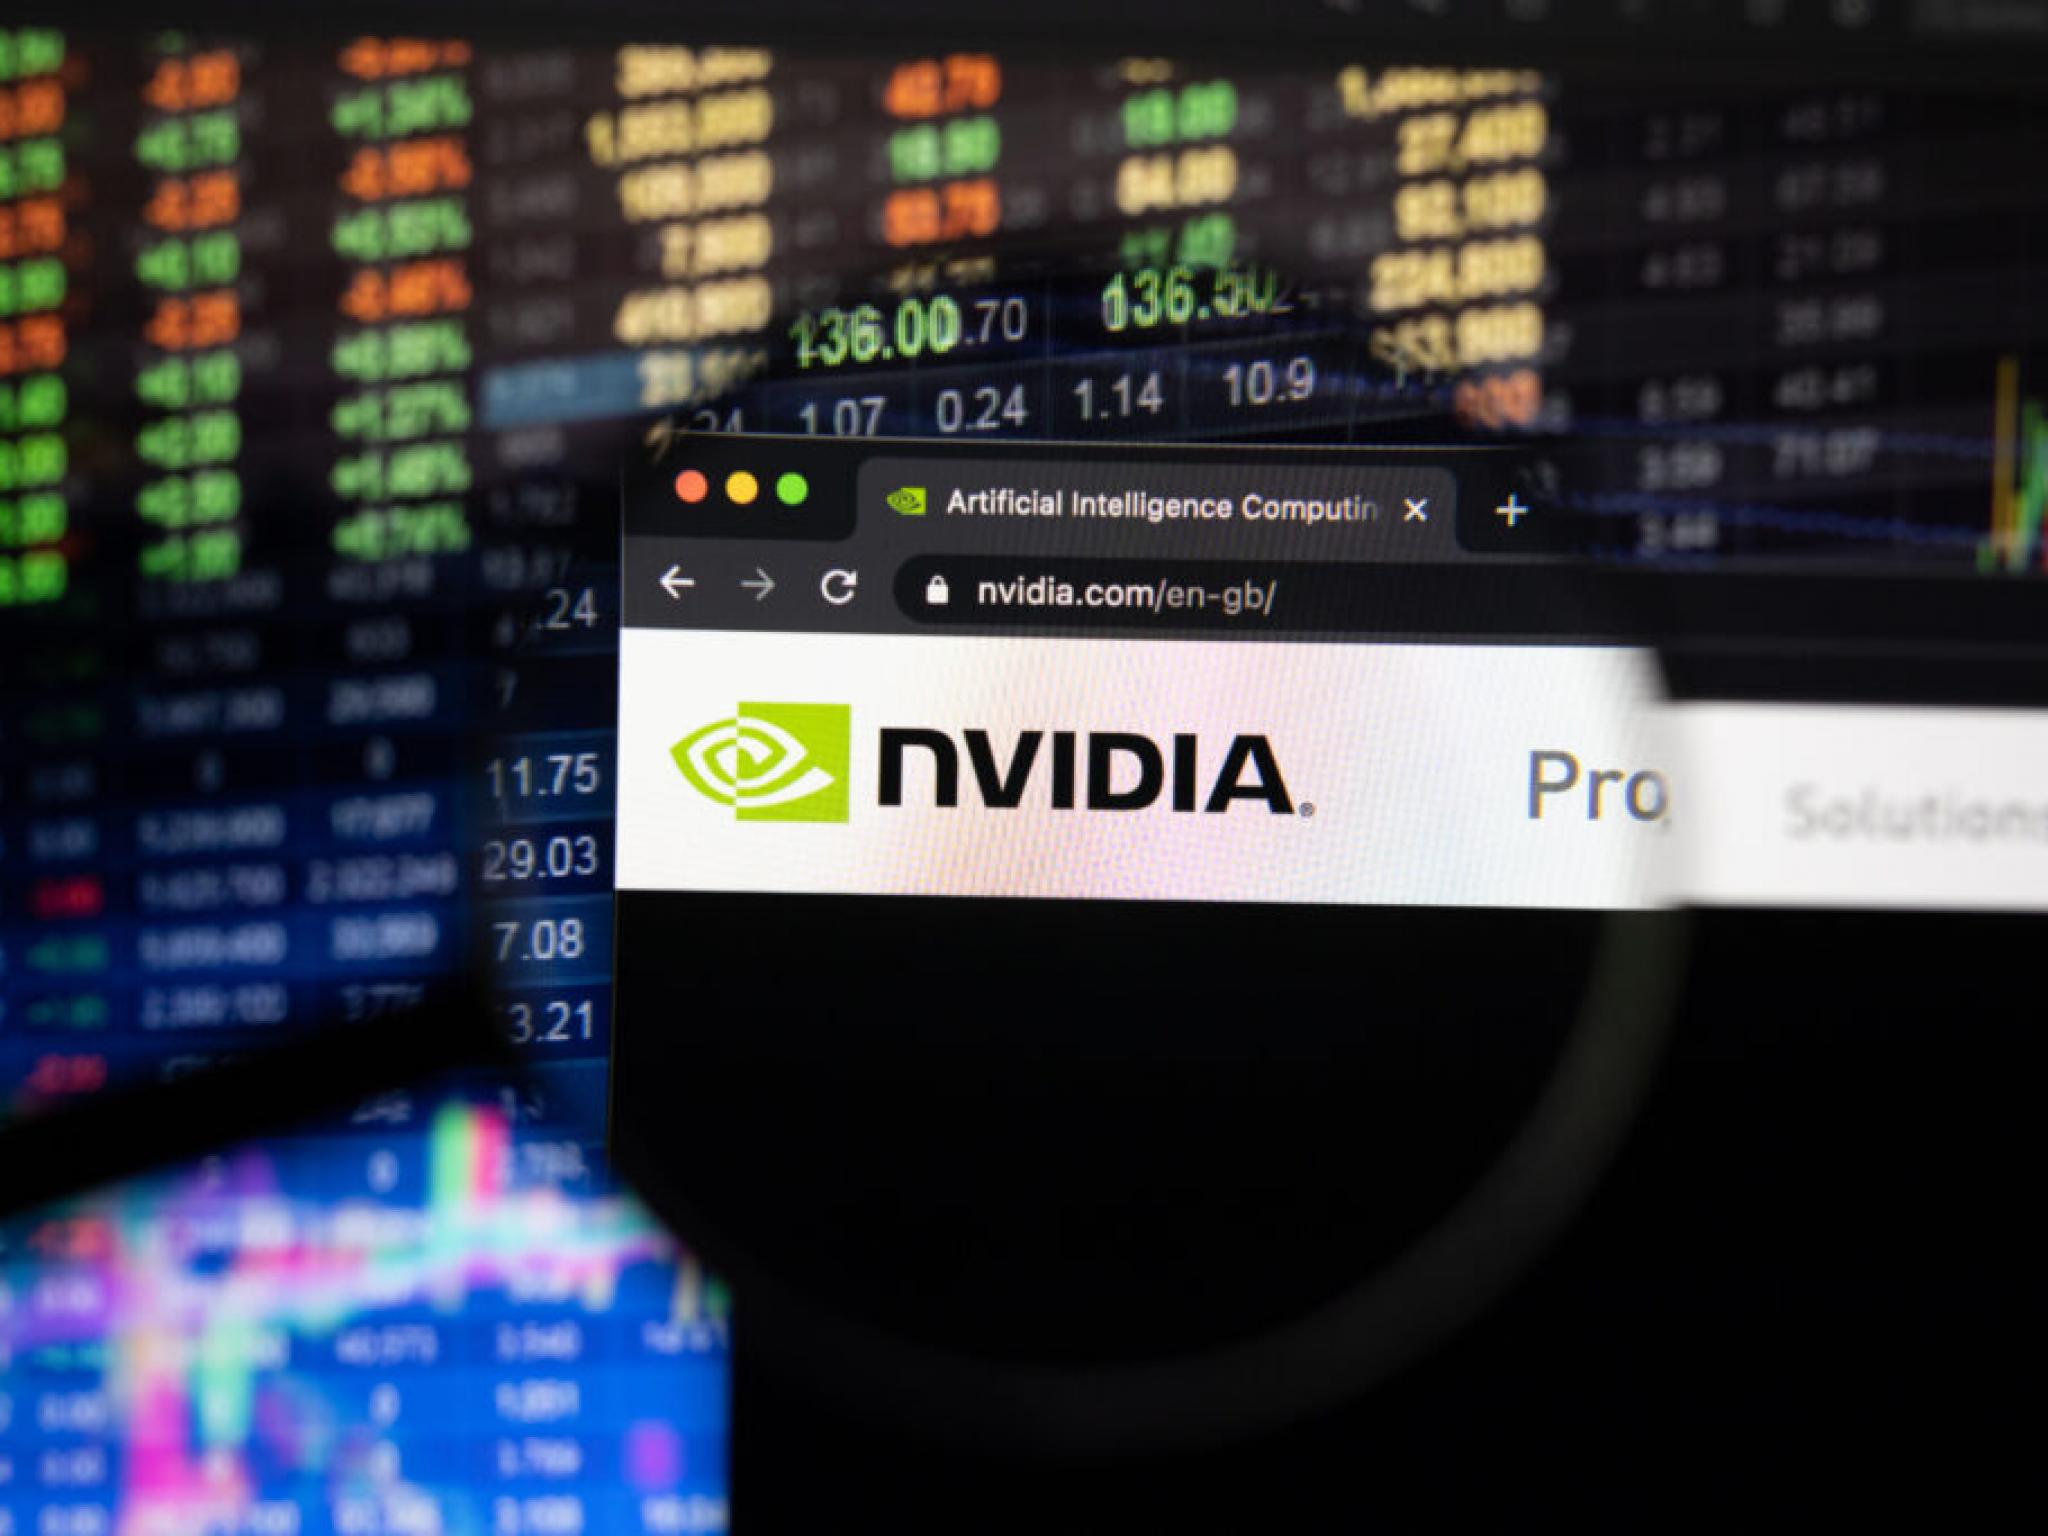  nvidia-stock-faces-decline-in-coming-years-as-ai-chip-demand-softens-warns-analyst-were-looking-at-the-horizon 